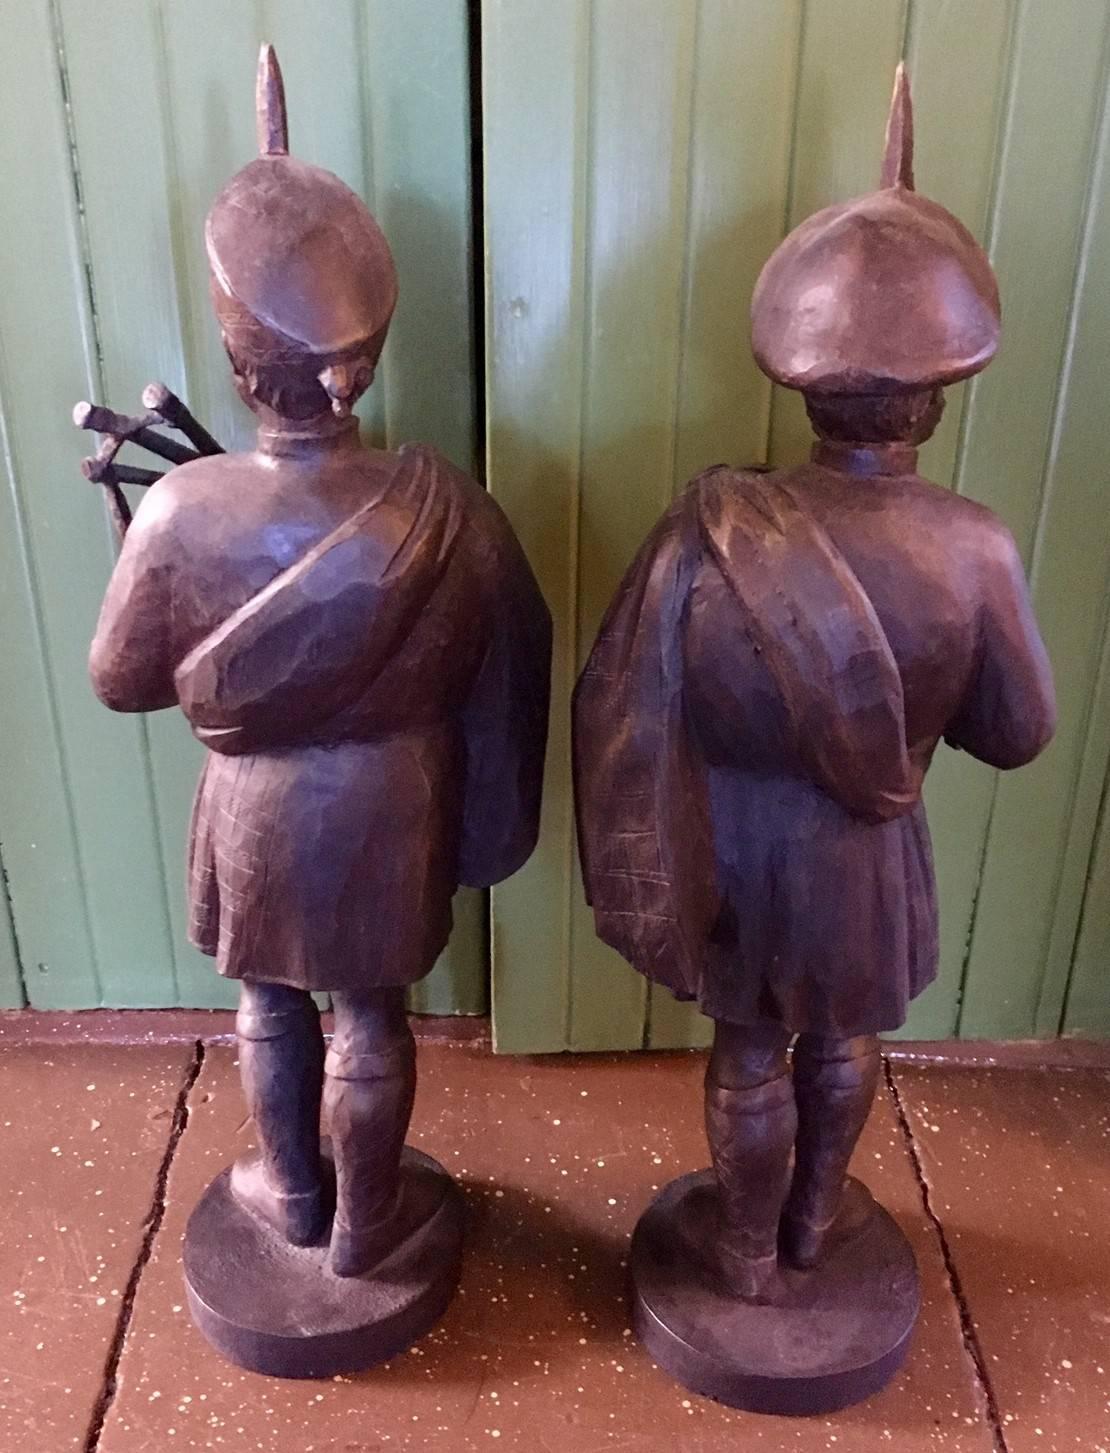 Mid-19th Century carved and decorated counter-top Tobacconist’s Trade figures, circa 1850. Each with striking detail and beautiful patina, with the original gilding rubbed well into the wood creating a warm sheen. Each obviously carved by the same